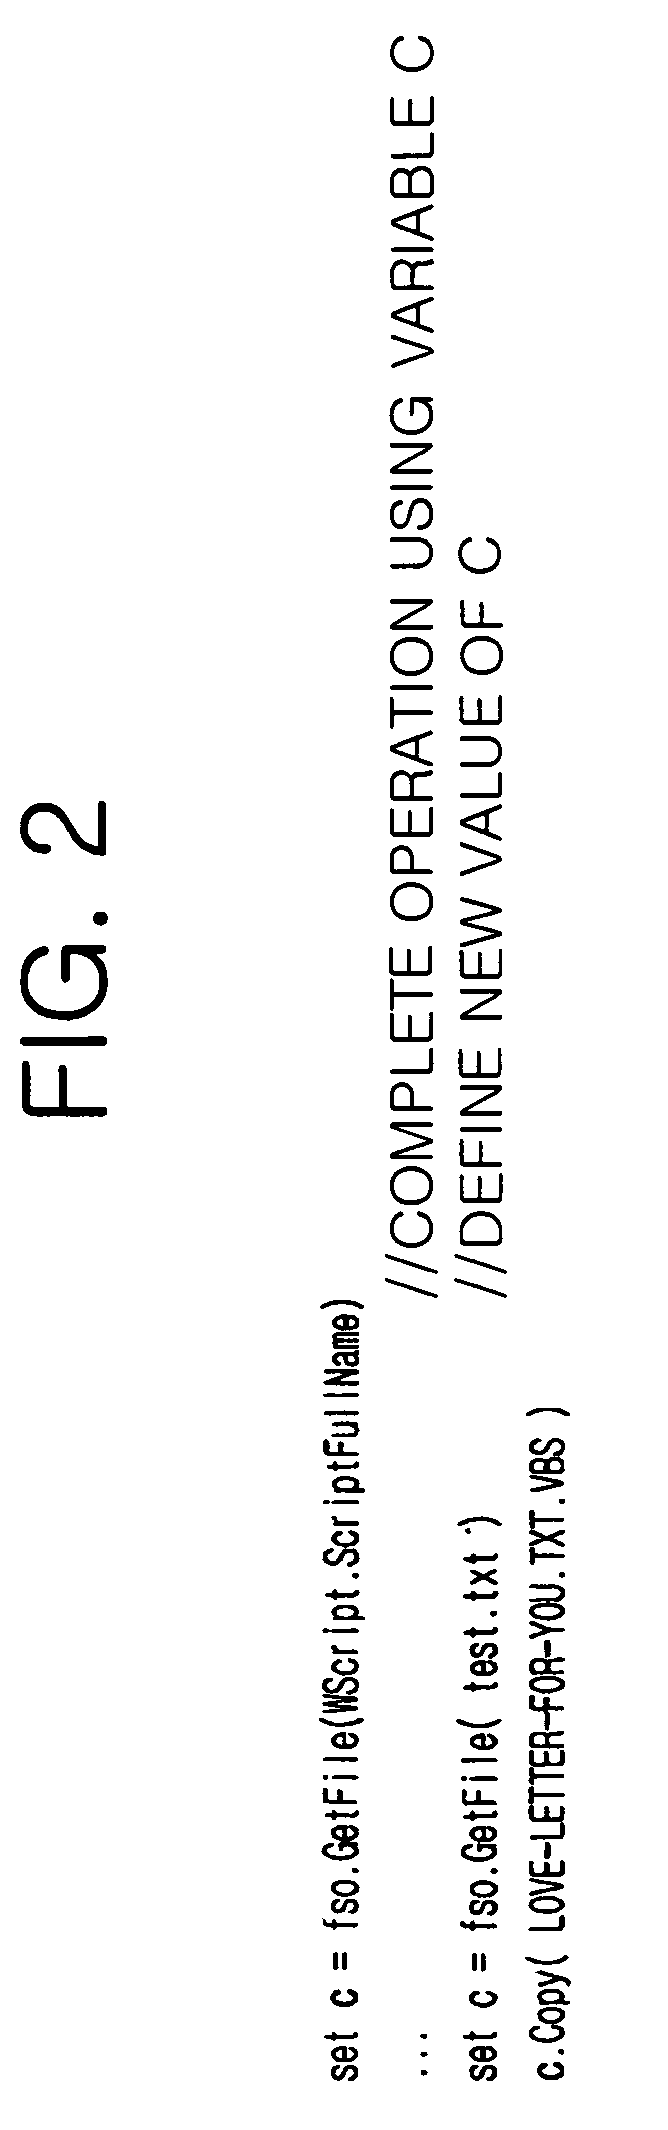 Method for detecting malicious code patterns in consideration of control and data flows